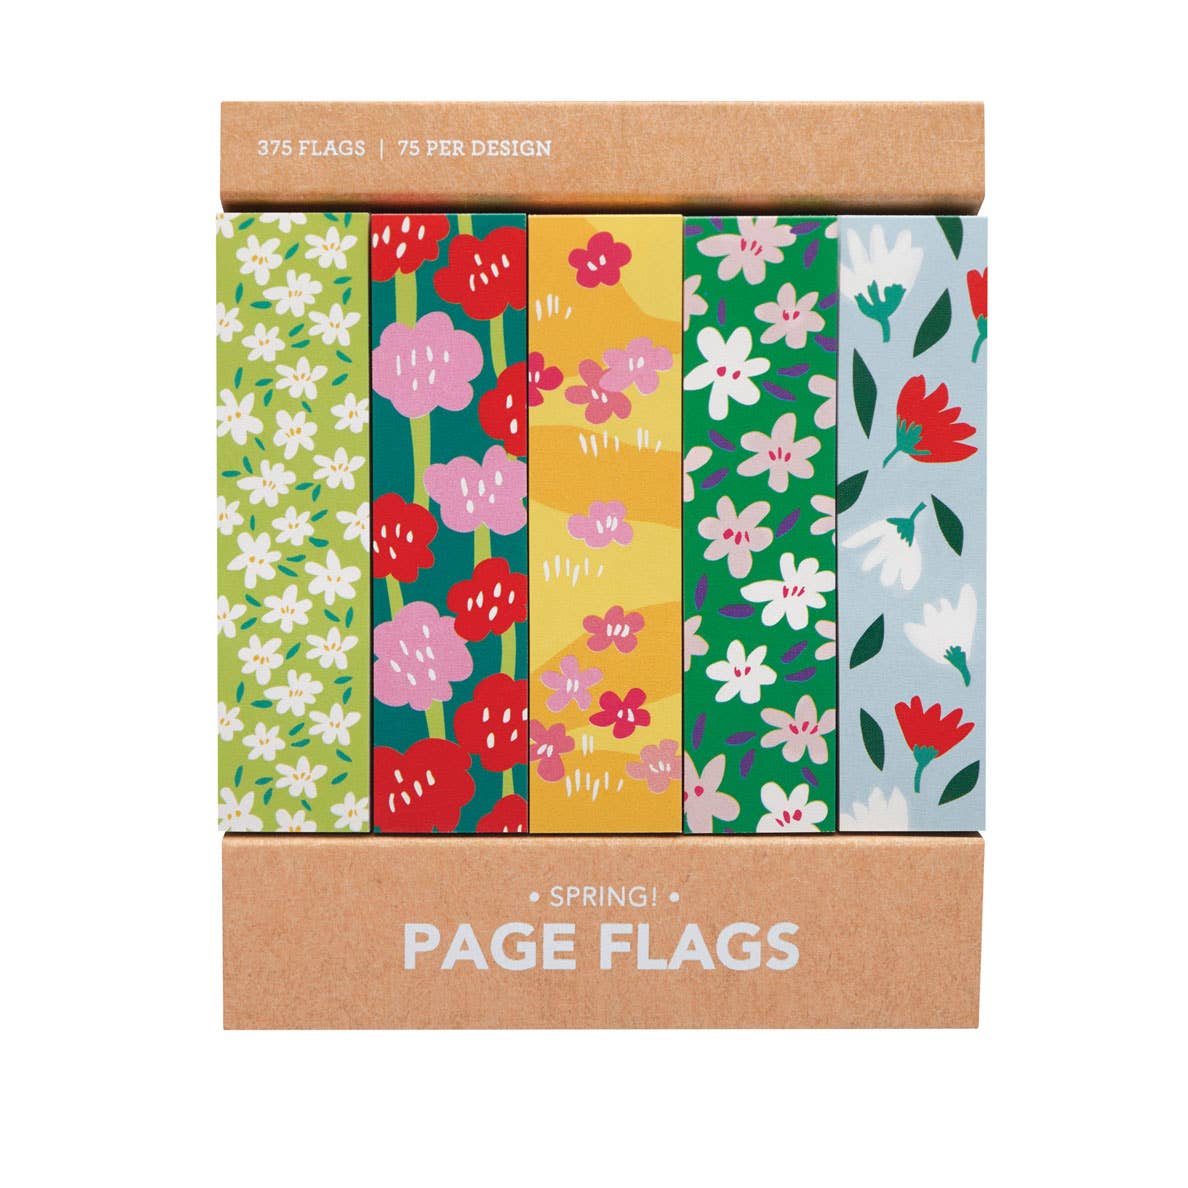 Girl of All Work Spring! Page Flags - Paper Dream